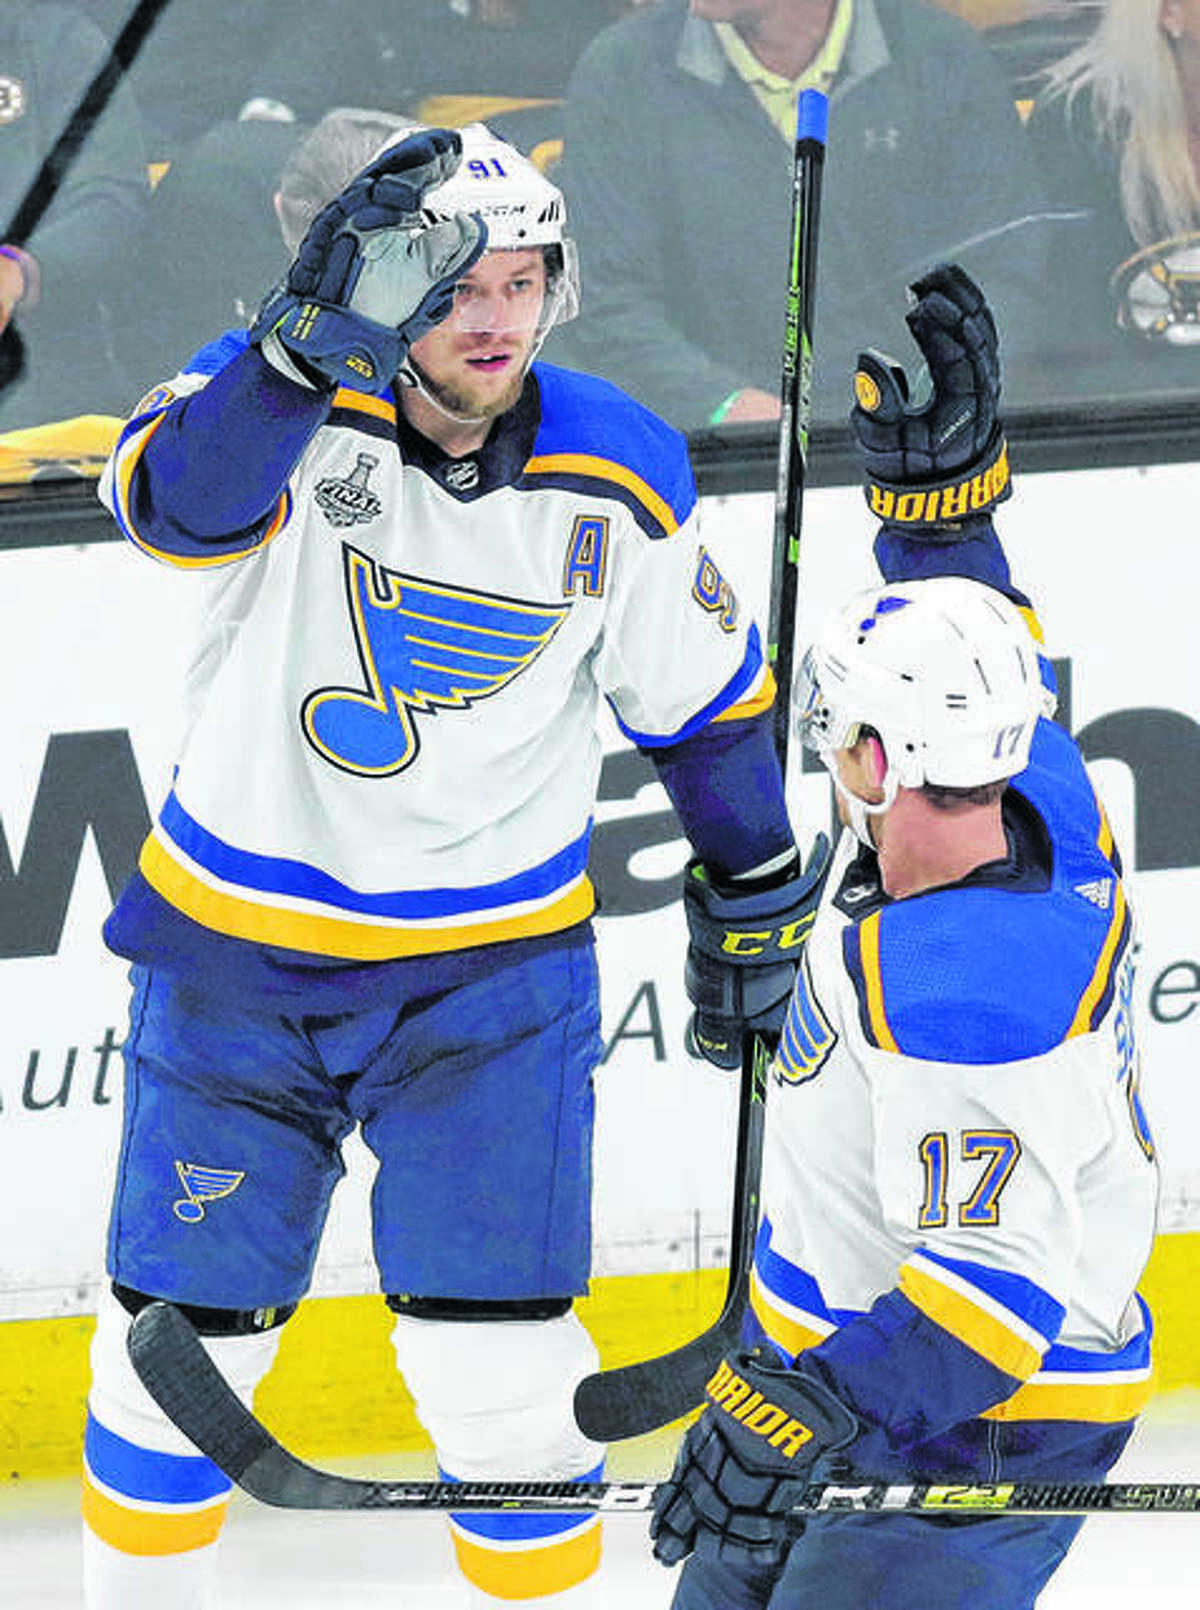 The Blues’ Vladimir Tarasenko, left, celebrates a goal against the Boston Bruins in Game 1 of the Stanley Cup Final May 27 in Boston. The Blues, who went on to win the Stanley Cup, will open their 2019 preseason schedule Sept. 16 at Dallas.